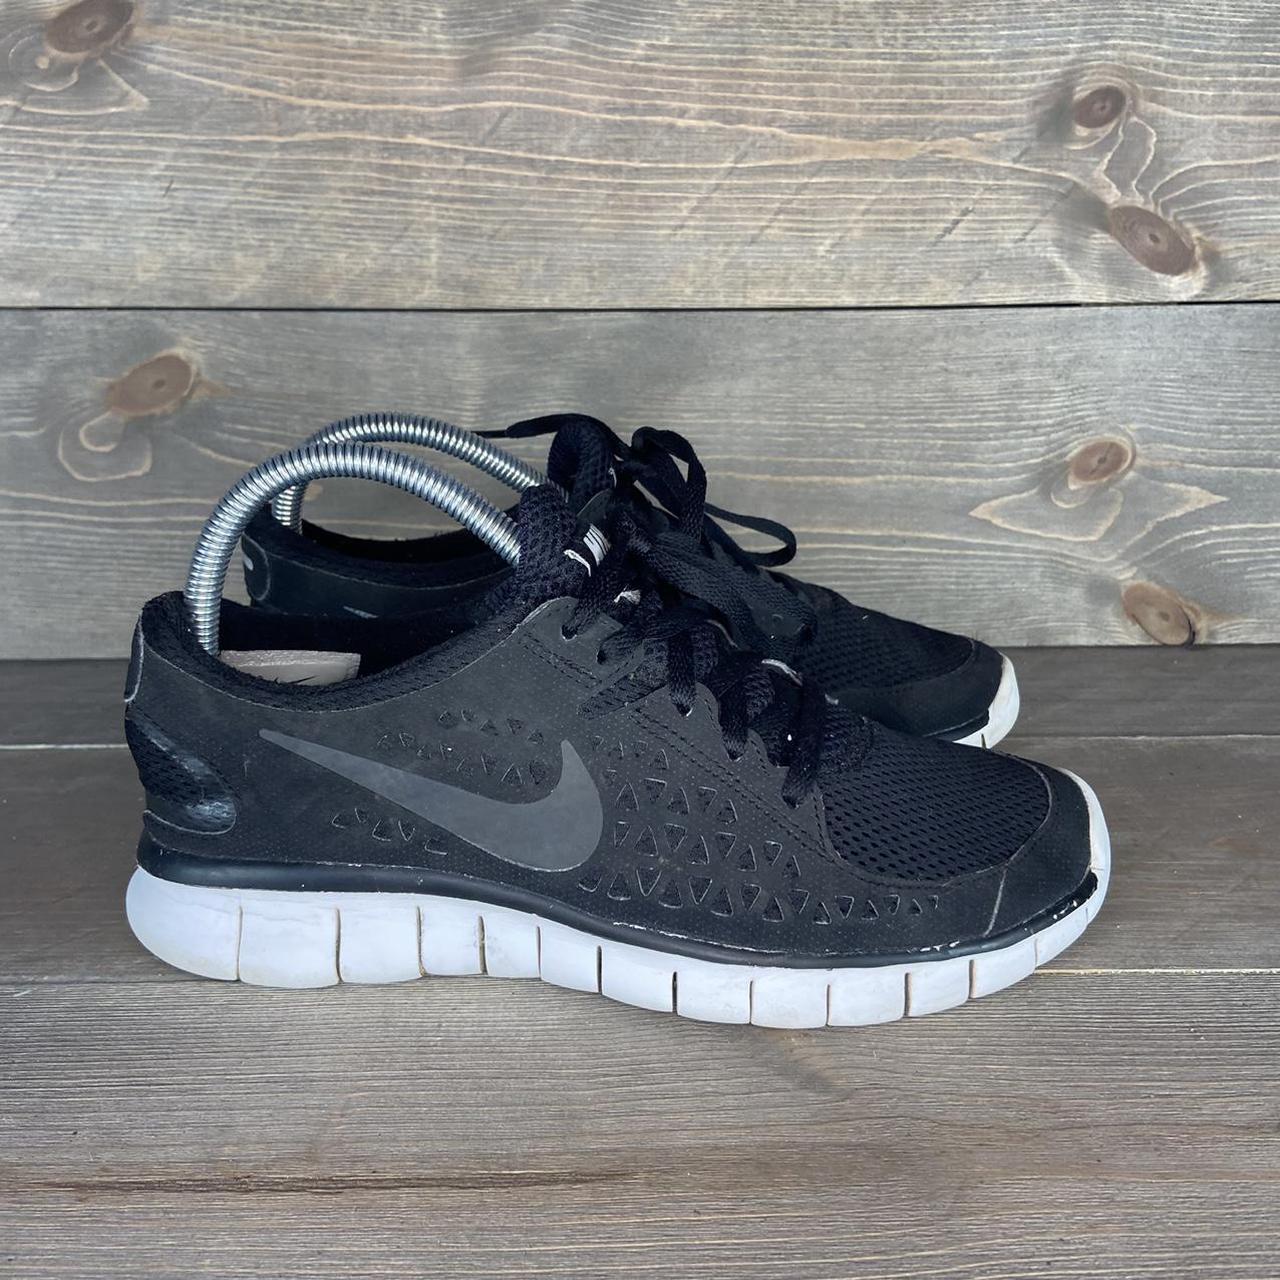 Product Image 1 - Nike free RN sneakers

Women’s size